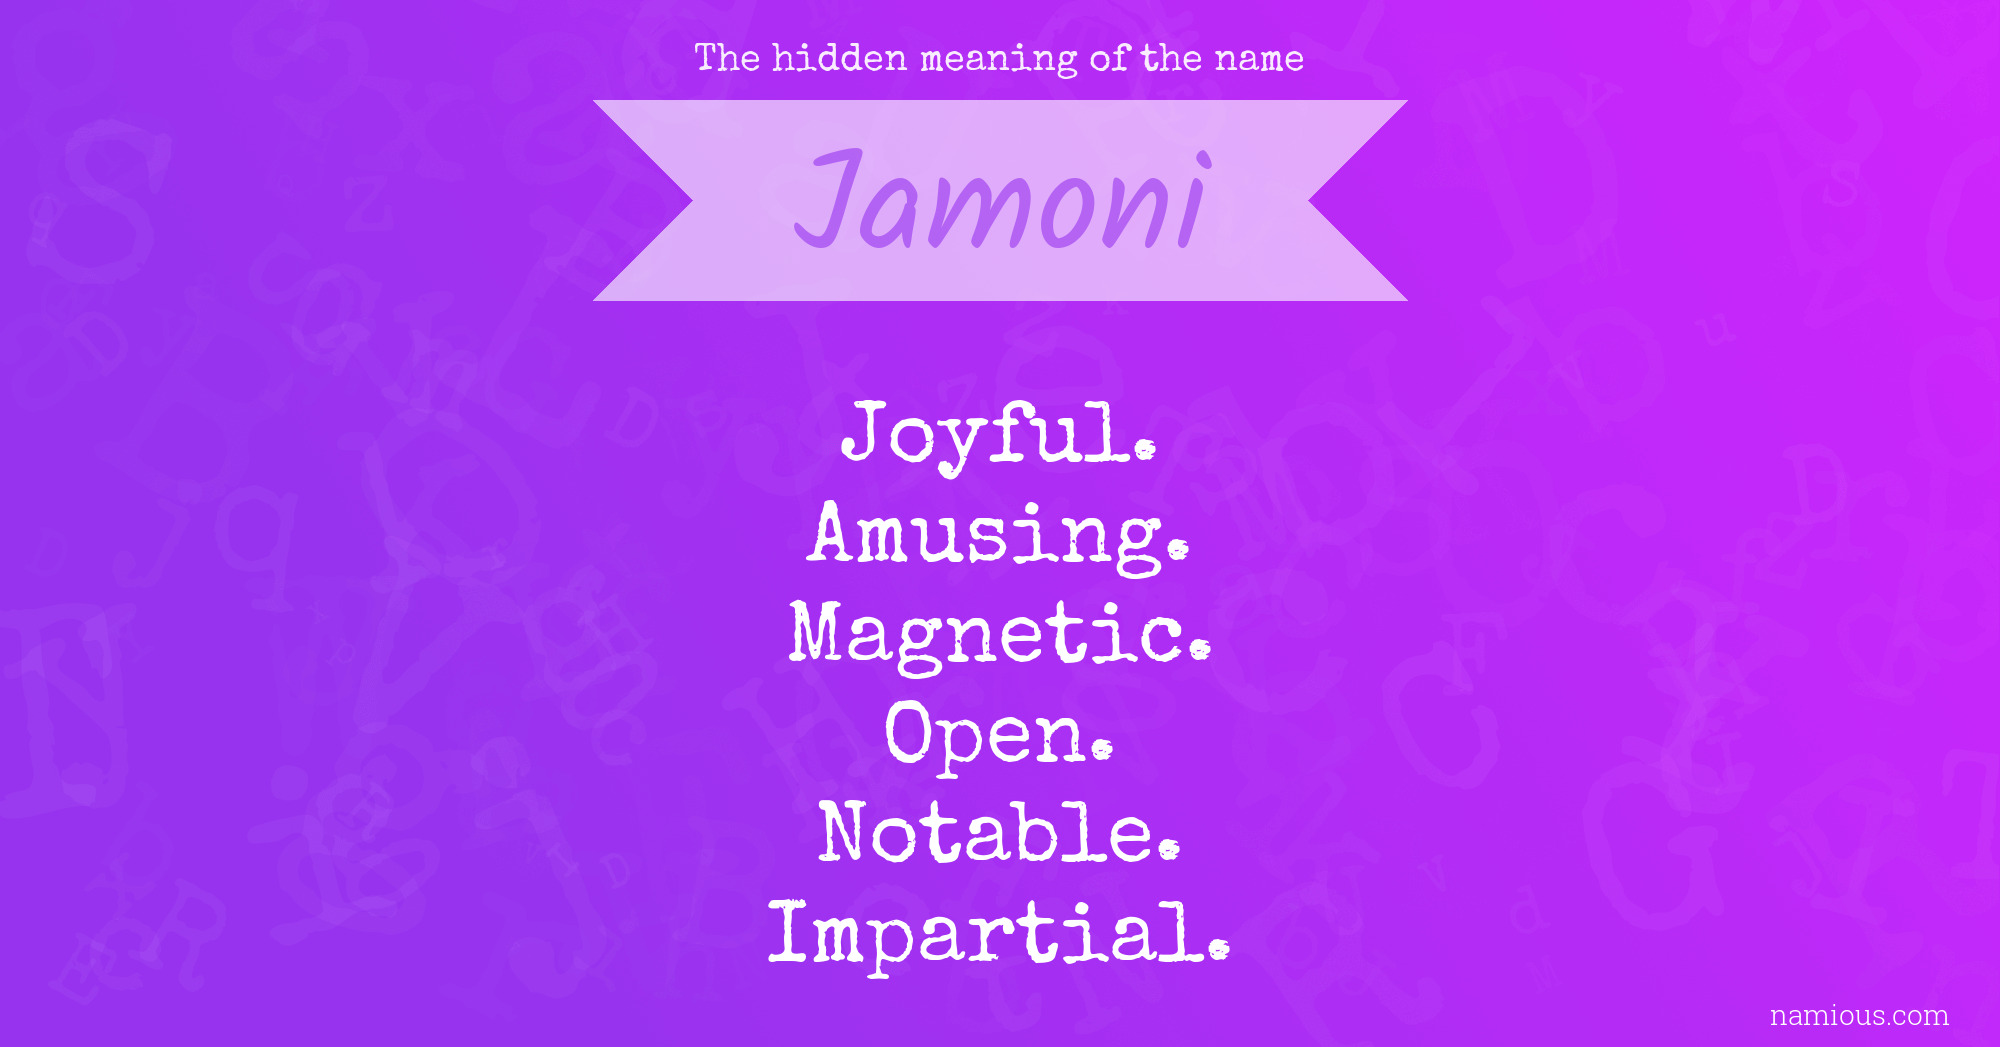 The hidden meaning of the name Jamoni